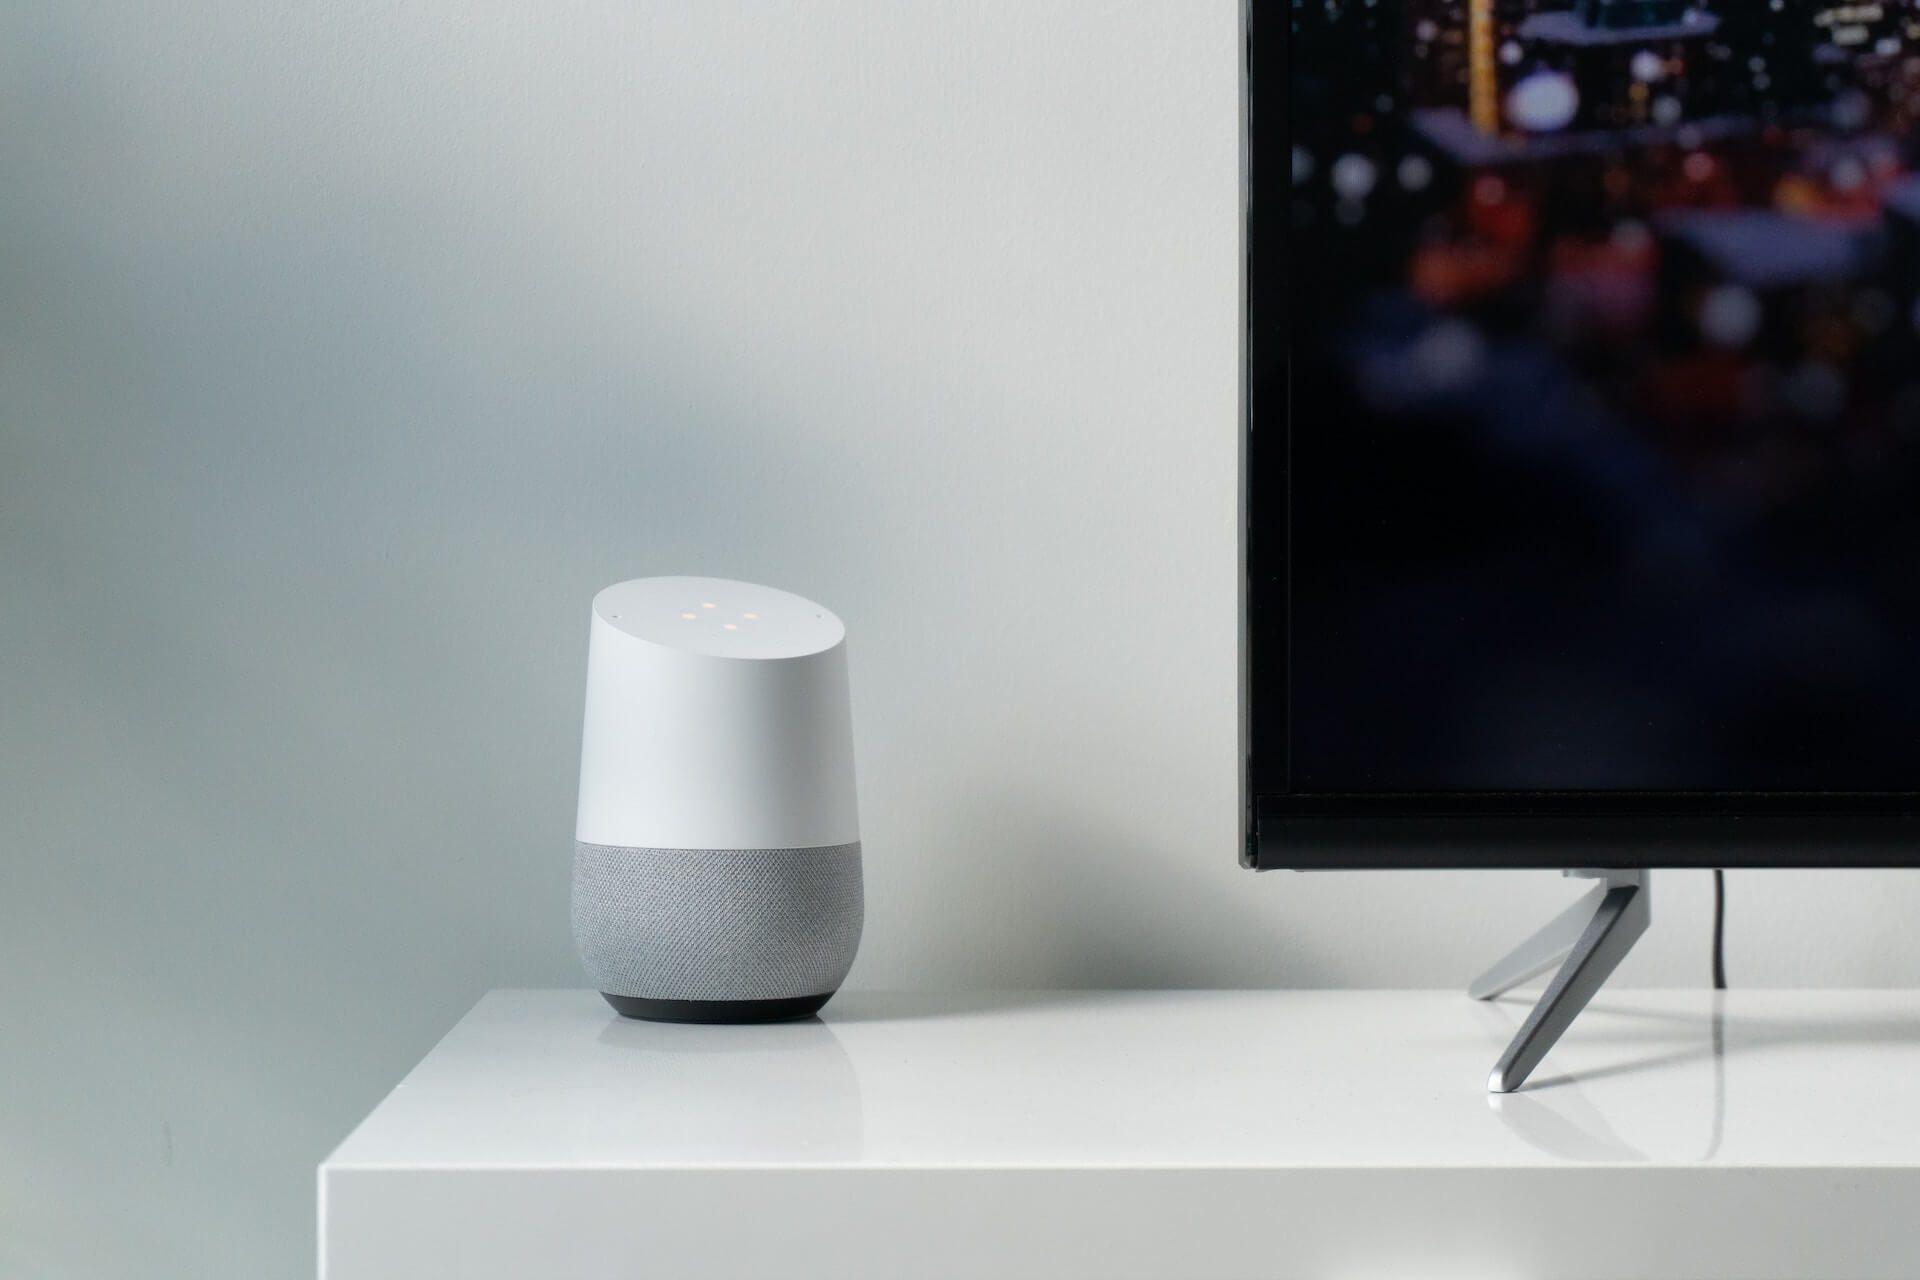 Master Google Assistant and Roku with these Voice Command Examples